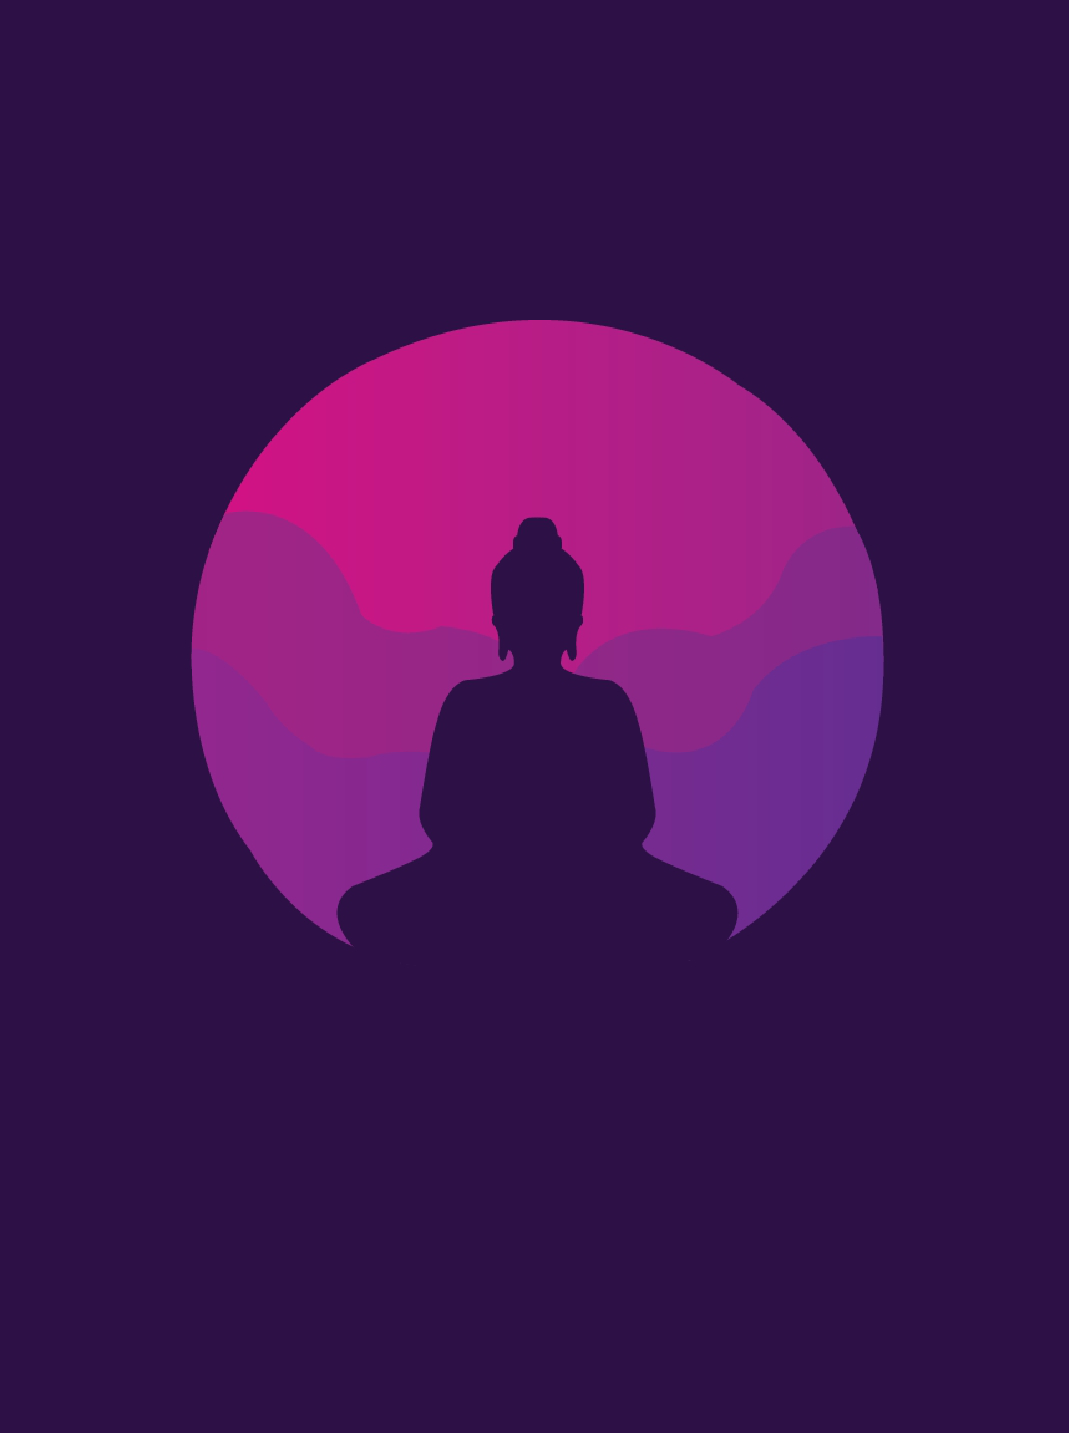 Peace Buddha Images Wallpapers